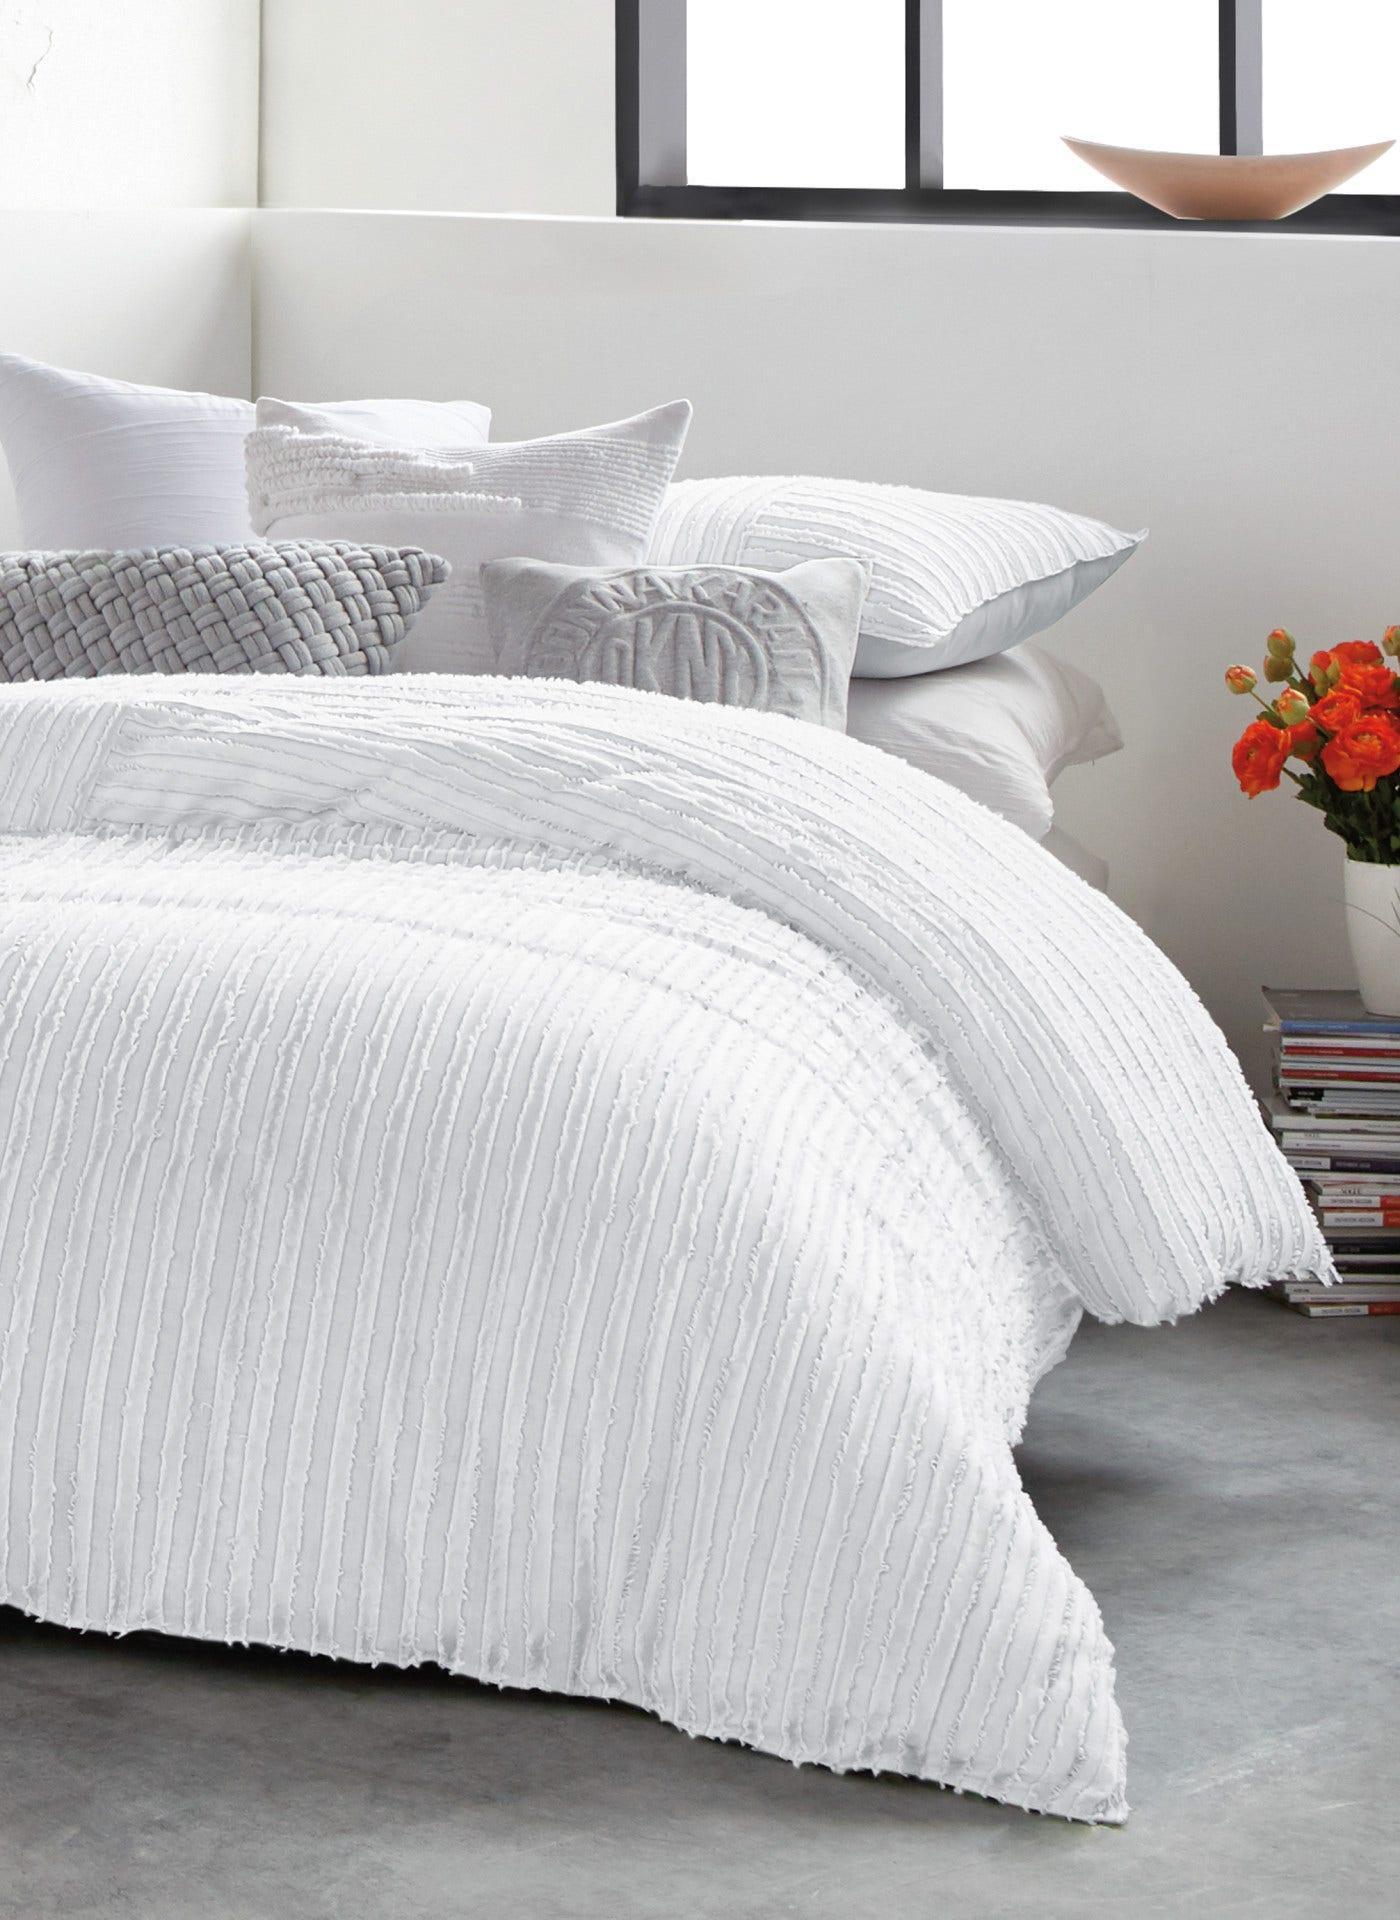 DKNY Clipped Squared Duvet Set in White Size Queen